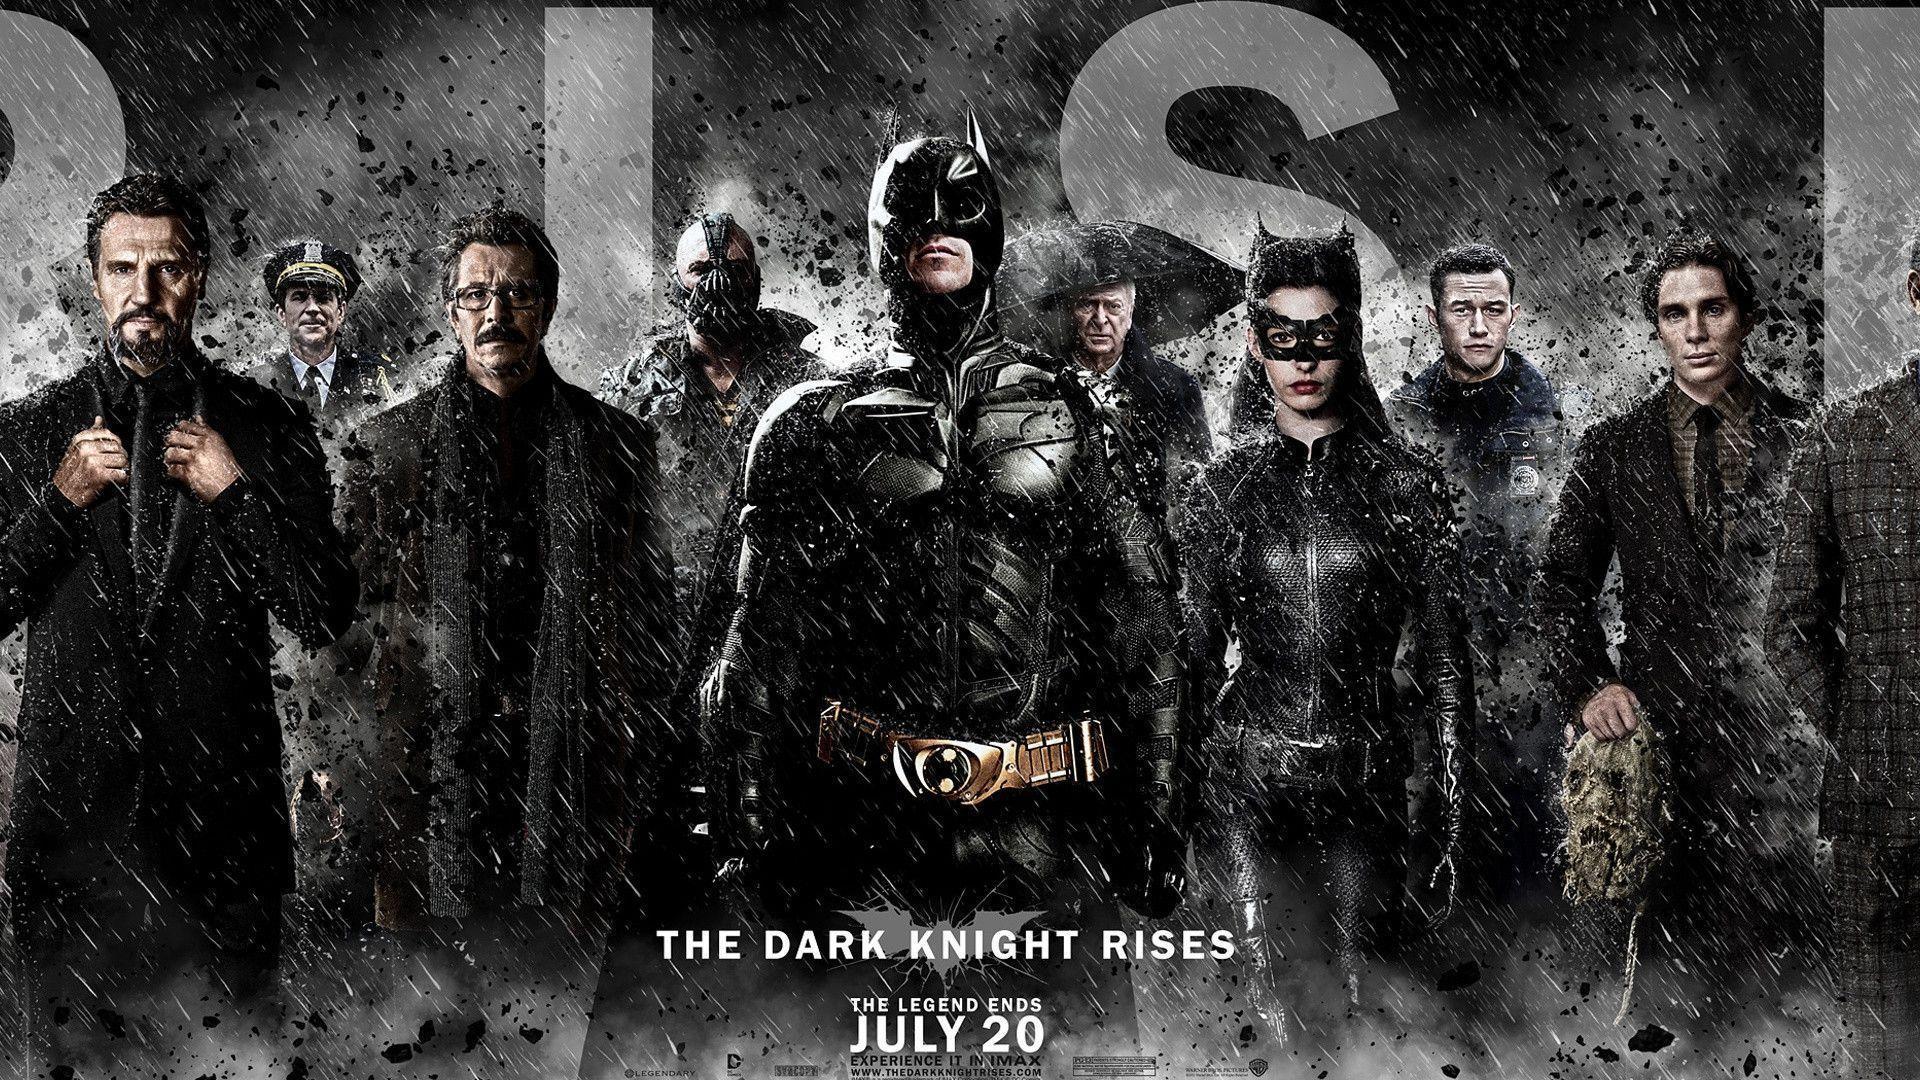 Image For > The Dark Knight Rises Wallpapers Hd 1920x1080